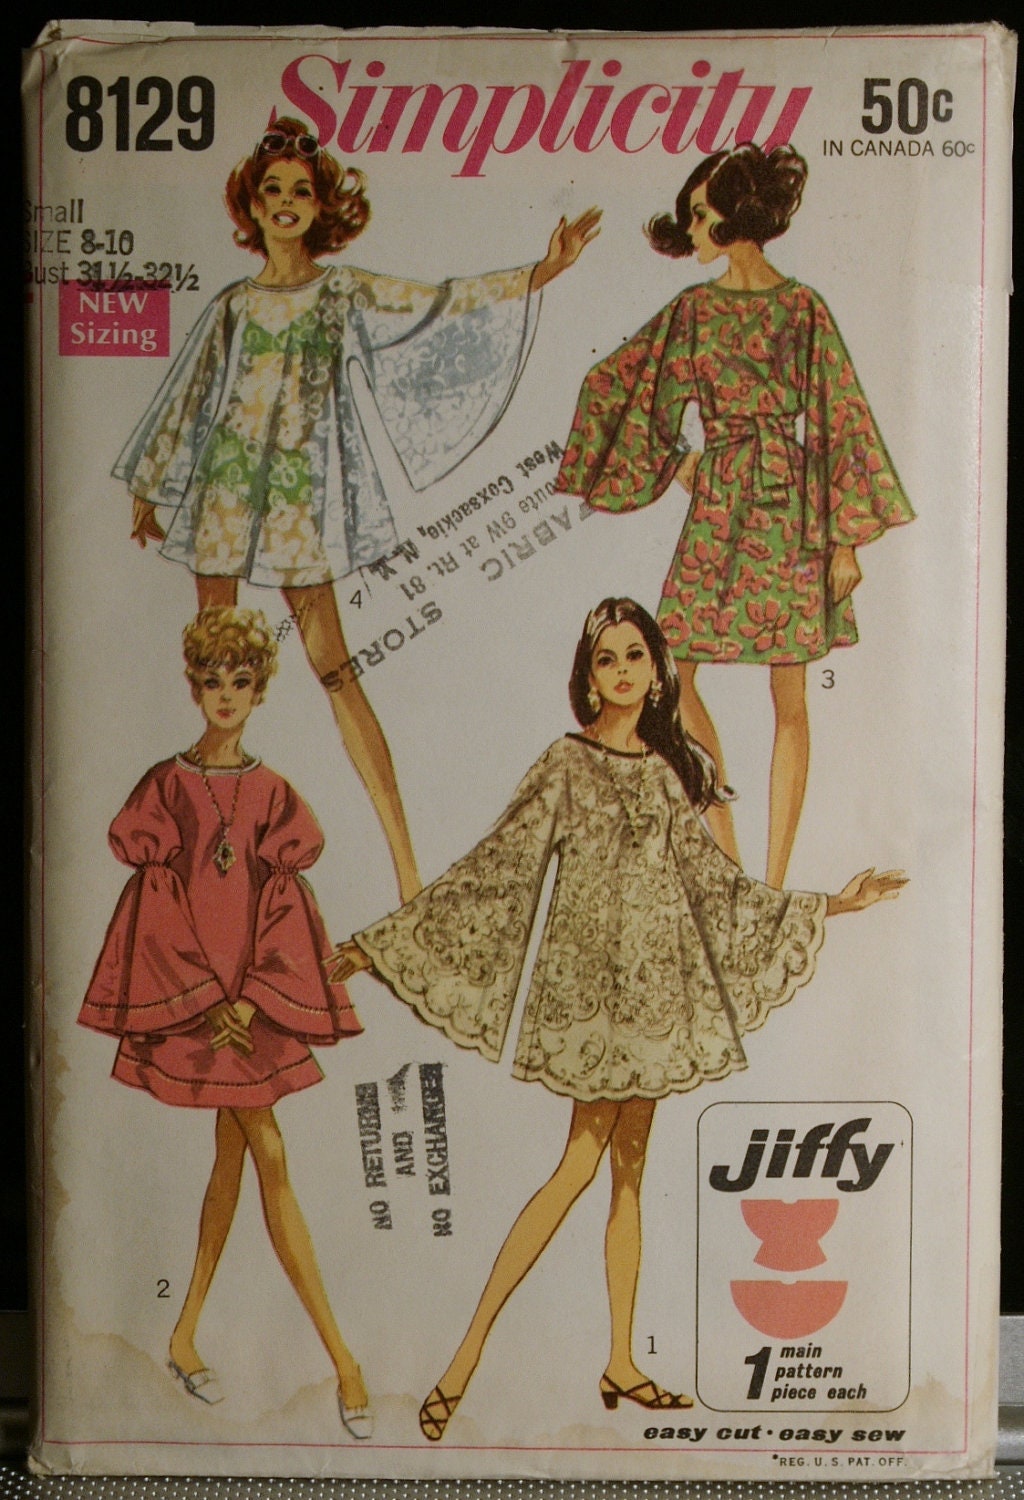 ... Hippie Dress with Angel Sleeves 60s Vintage Sewing Pattern Sz 8 to 10